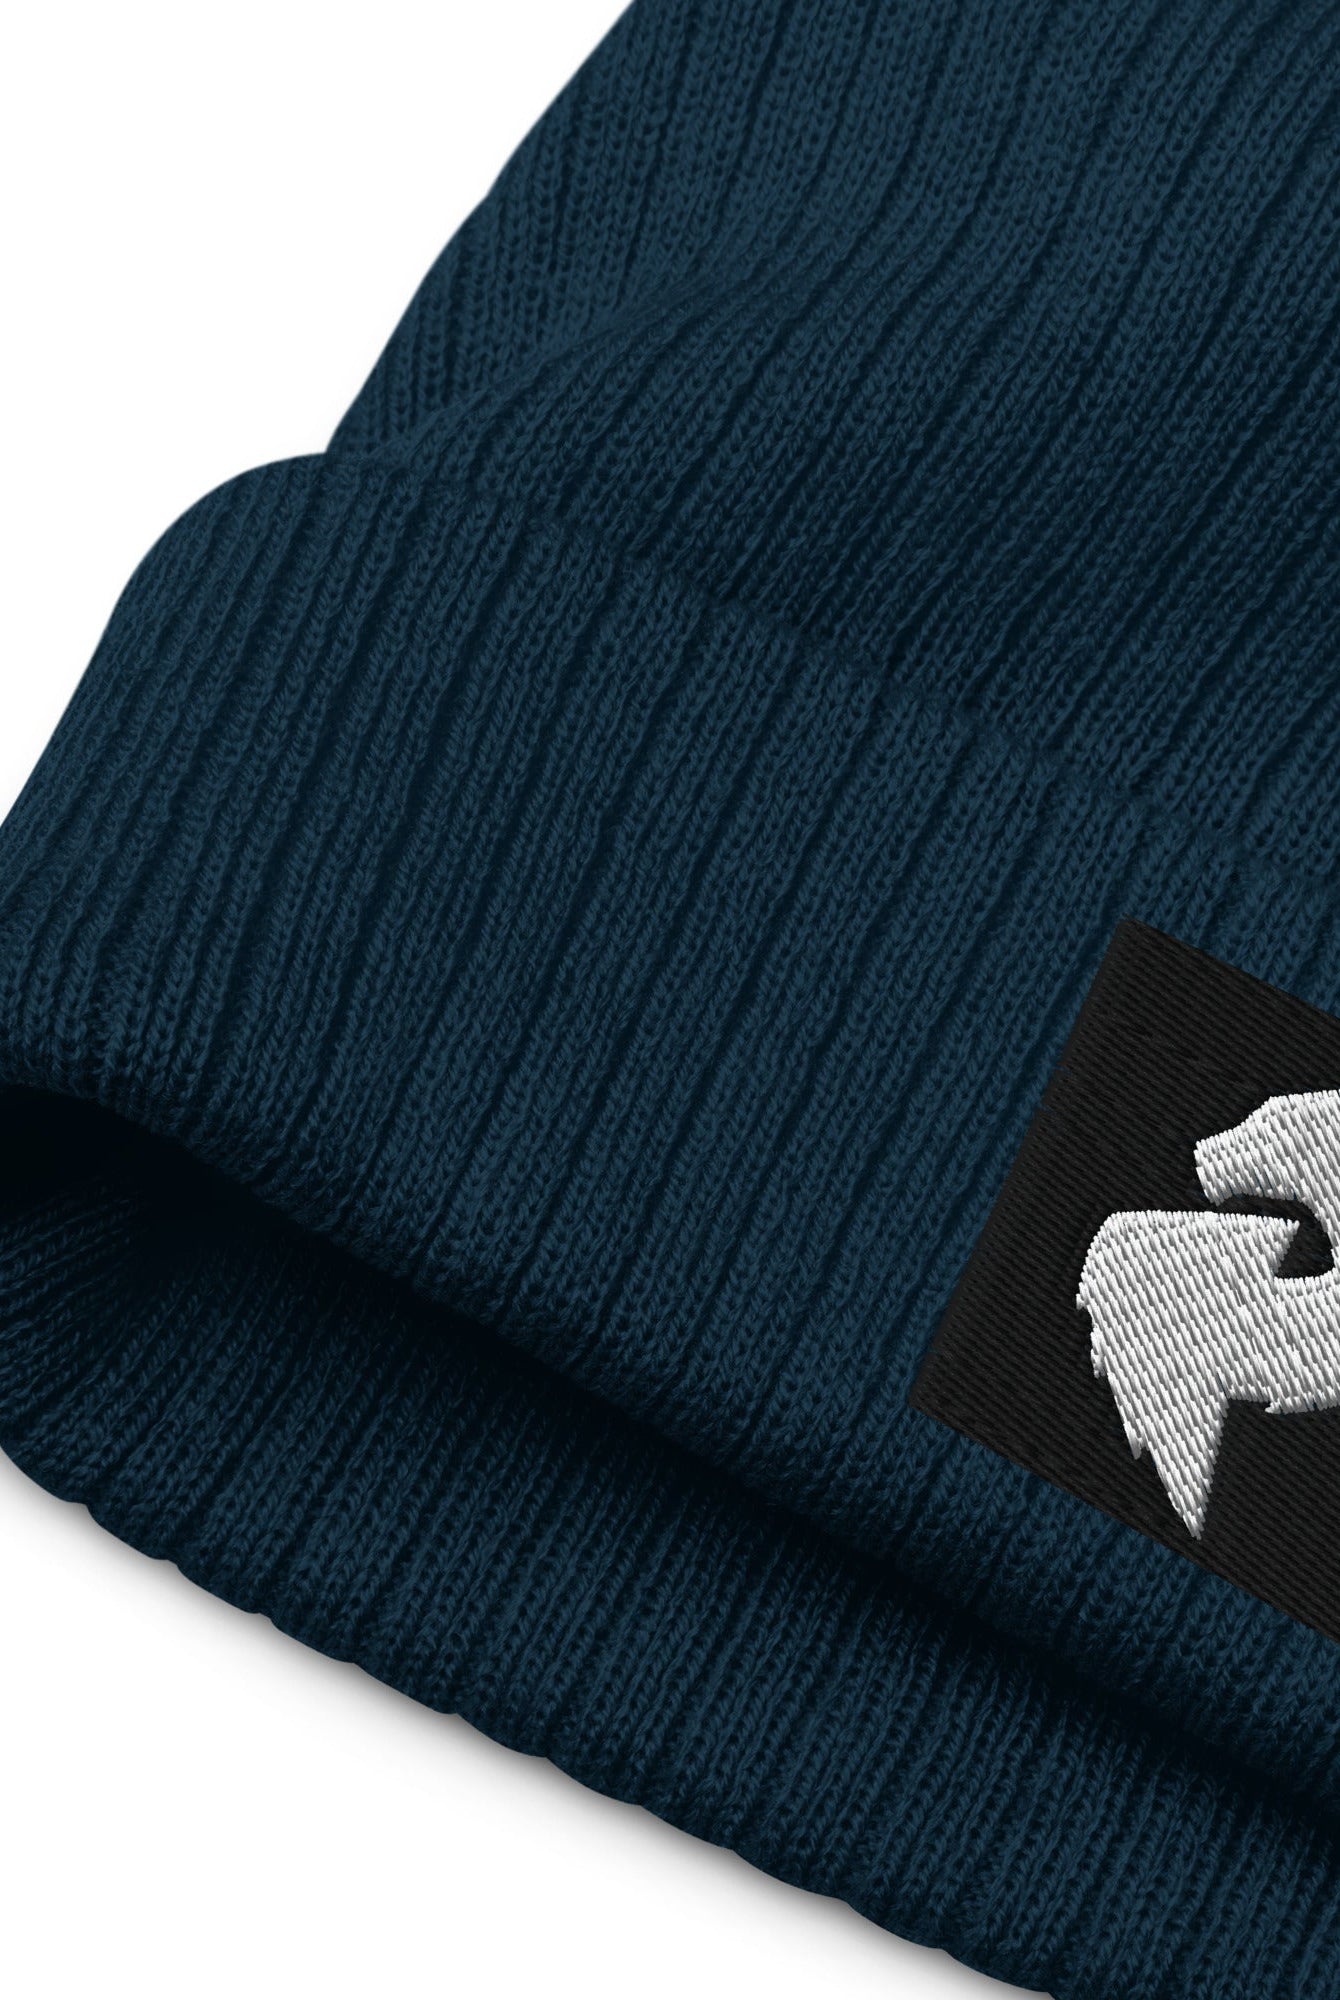 His or Hers Dragon Foxx™ Eco - Ribbed knit beanie - His or Hers Dragon Foxx™ Eco - Ribbed knit beanie - DRAGON FOXX™ - His or Hers Dragon Foxx™ Eco - Ribbed knit beanie - 2867494_13241 - Navy - - Accessories - Acid Green Eco - Ribbed knit beanie - Beanie